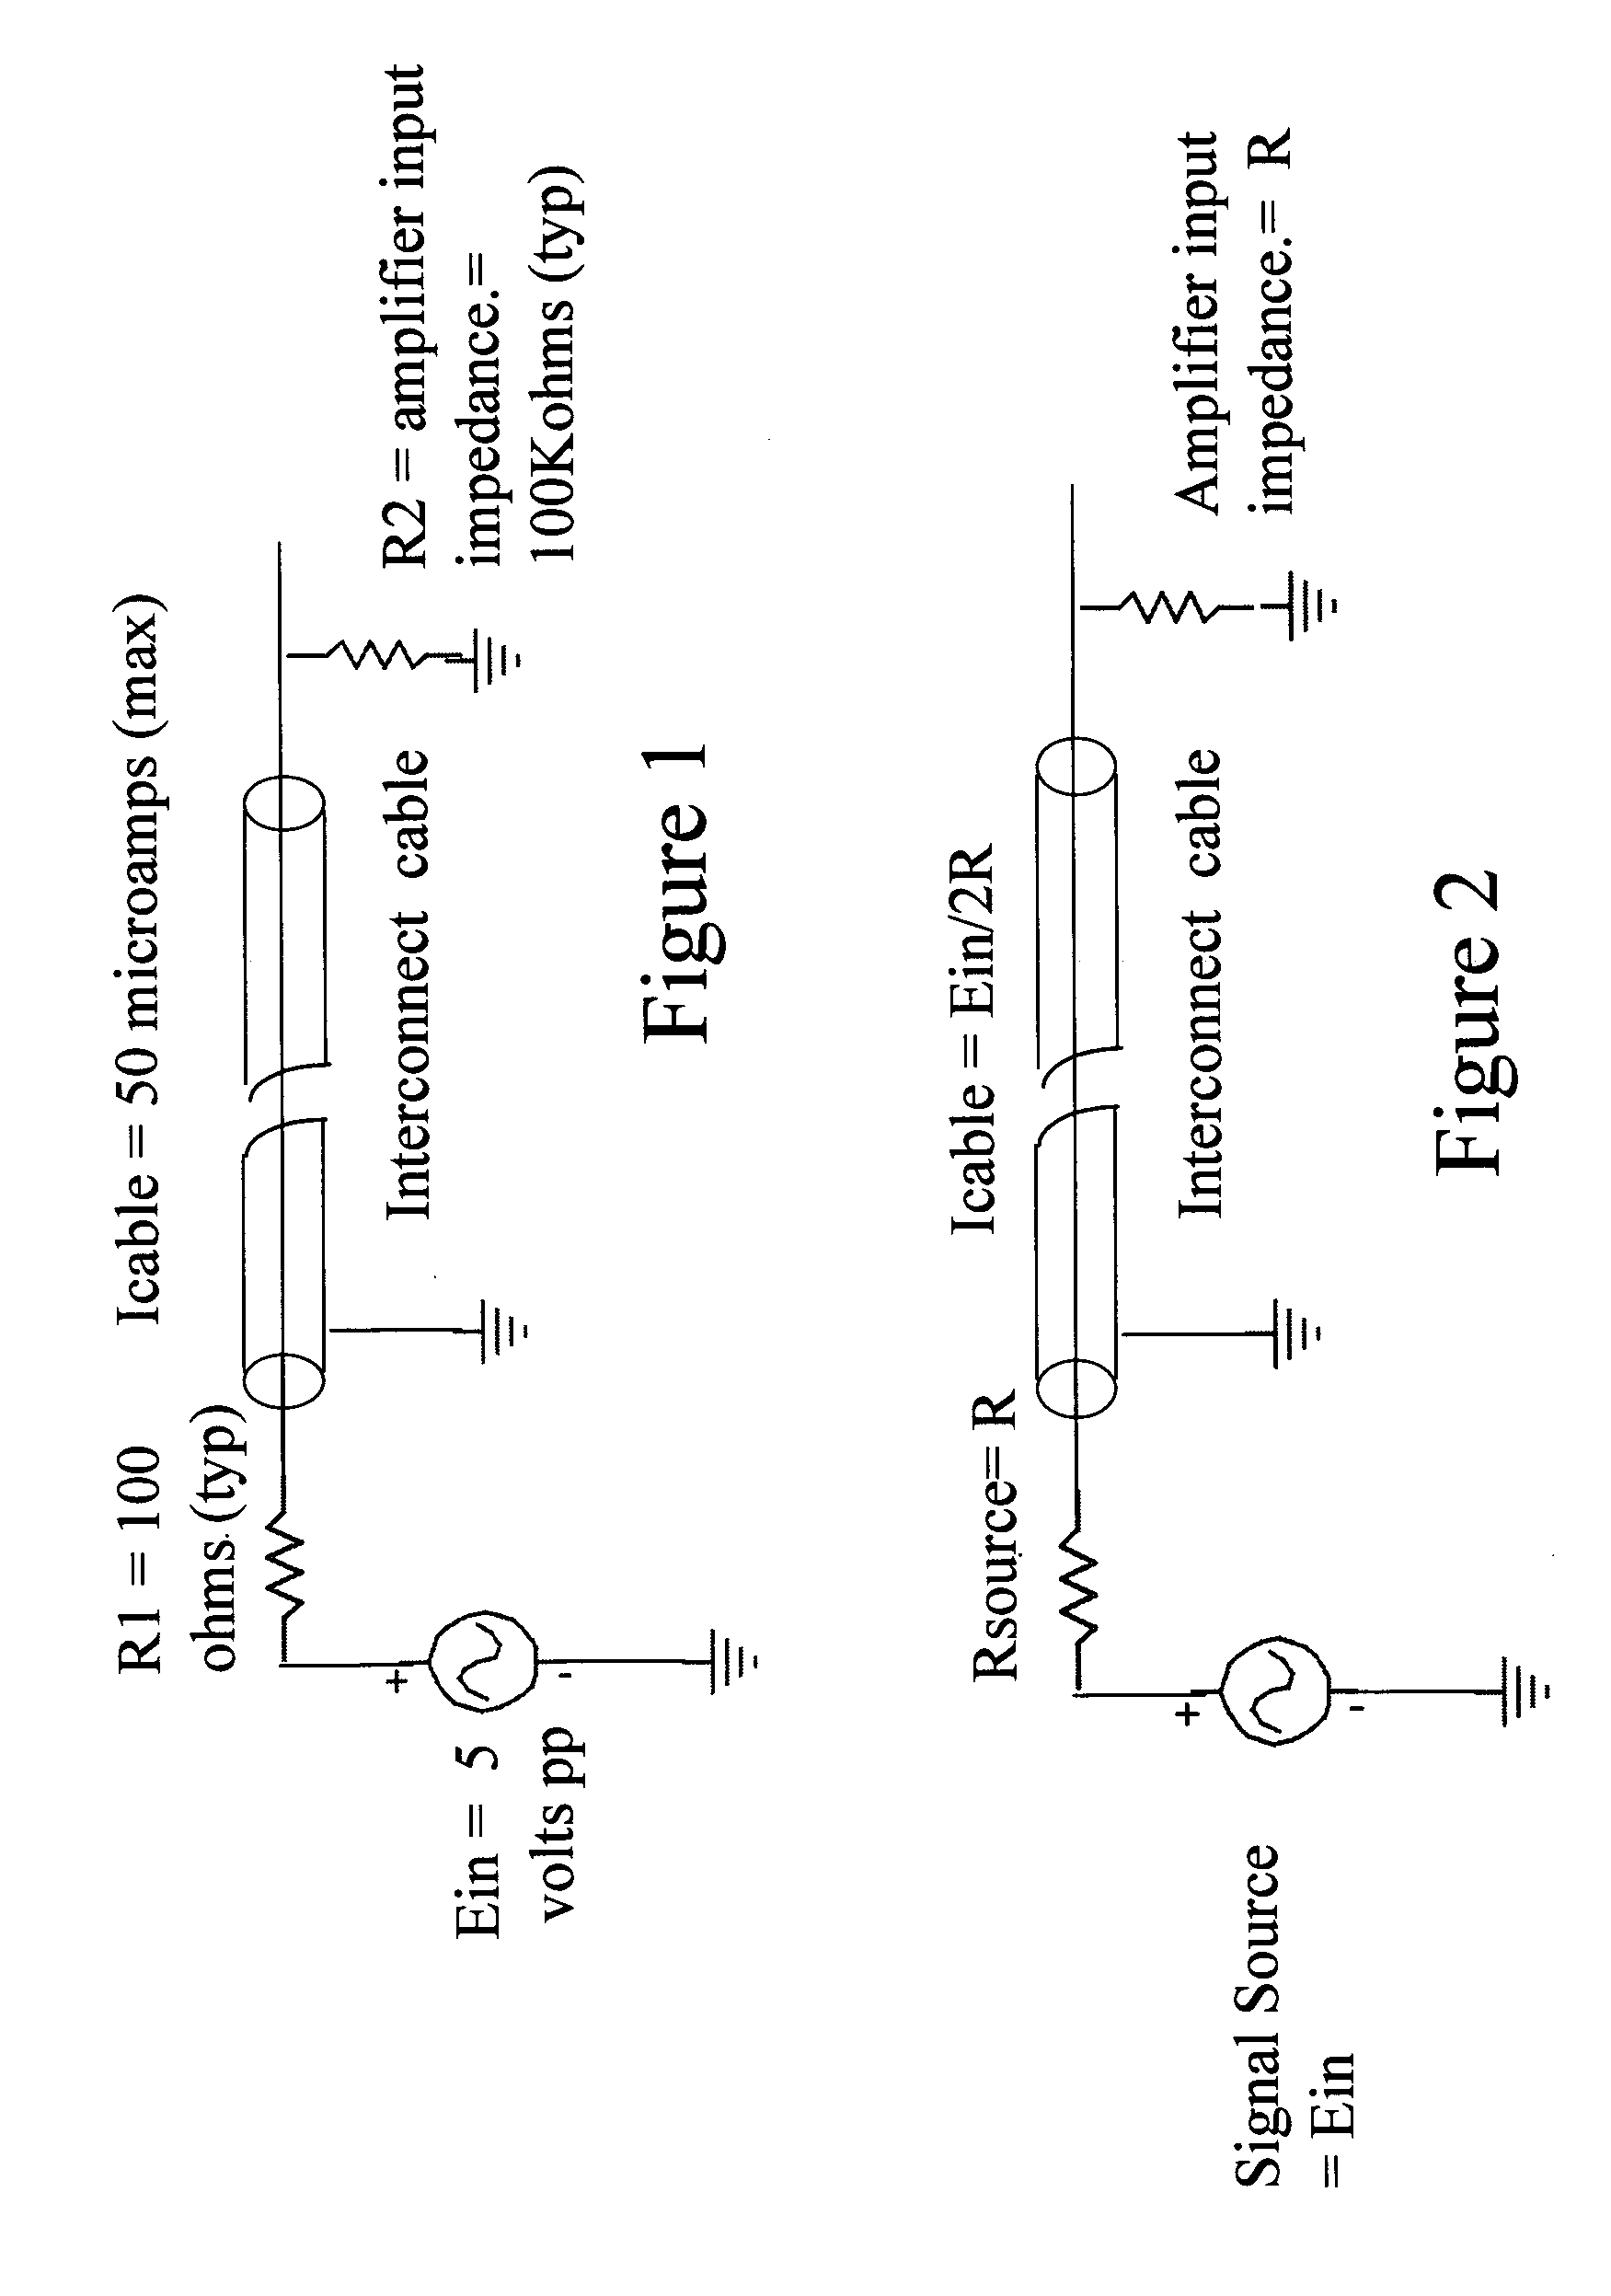 Transmission drive line for low level audio analog electrical signals